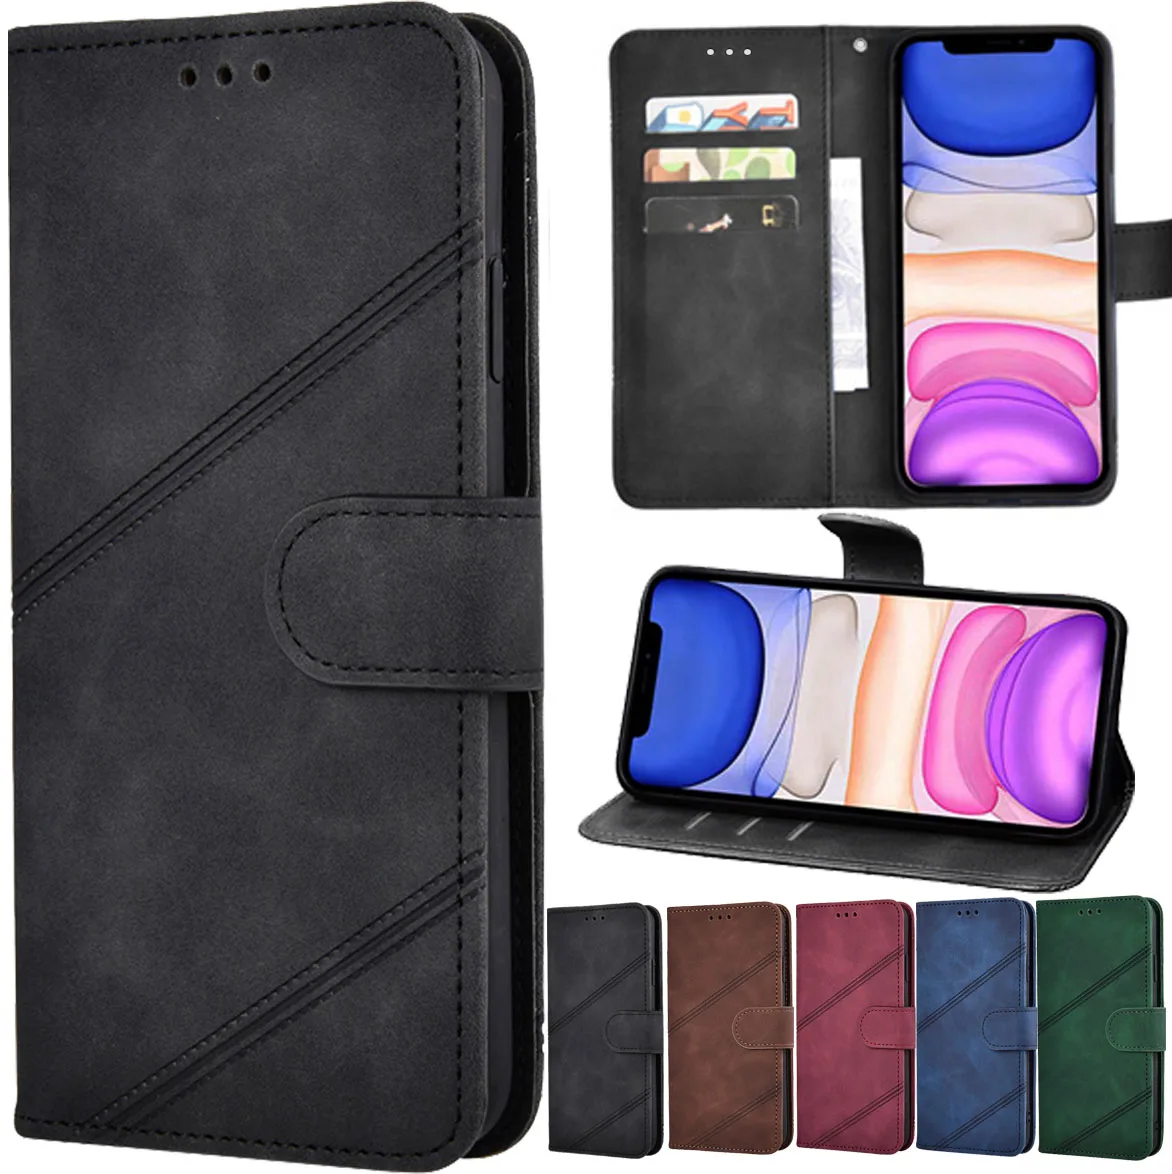 

Flip Leather Case For Samsung Galaxy J2 (2018) J3 2017 J5 J7 Neo Nxt Max Pro J2 Prime A3 A5 A7 A8 Plus 2018 On5 On7 2016 Cover